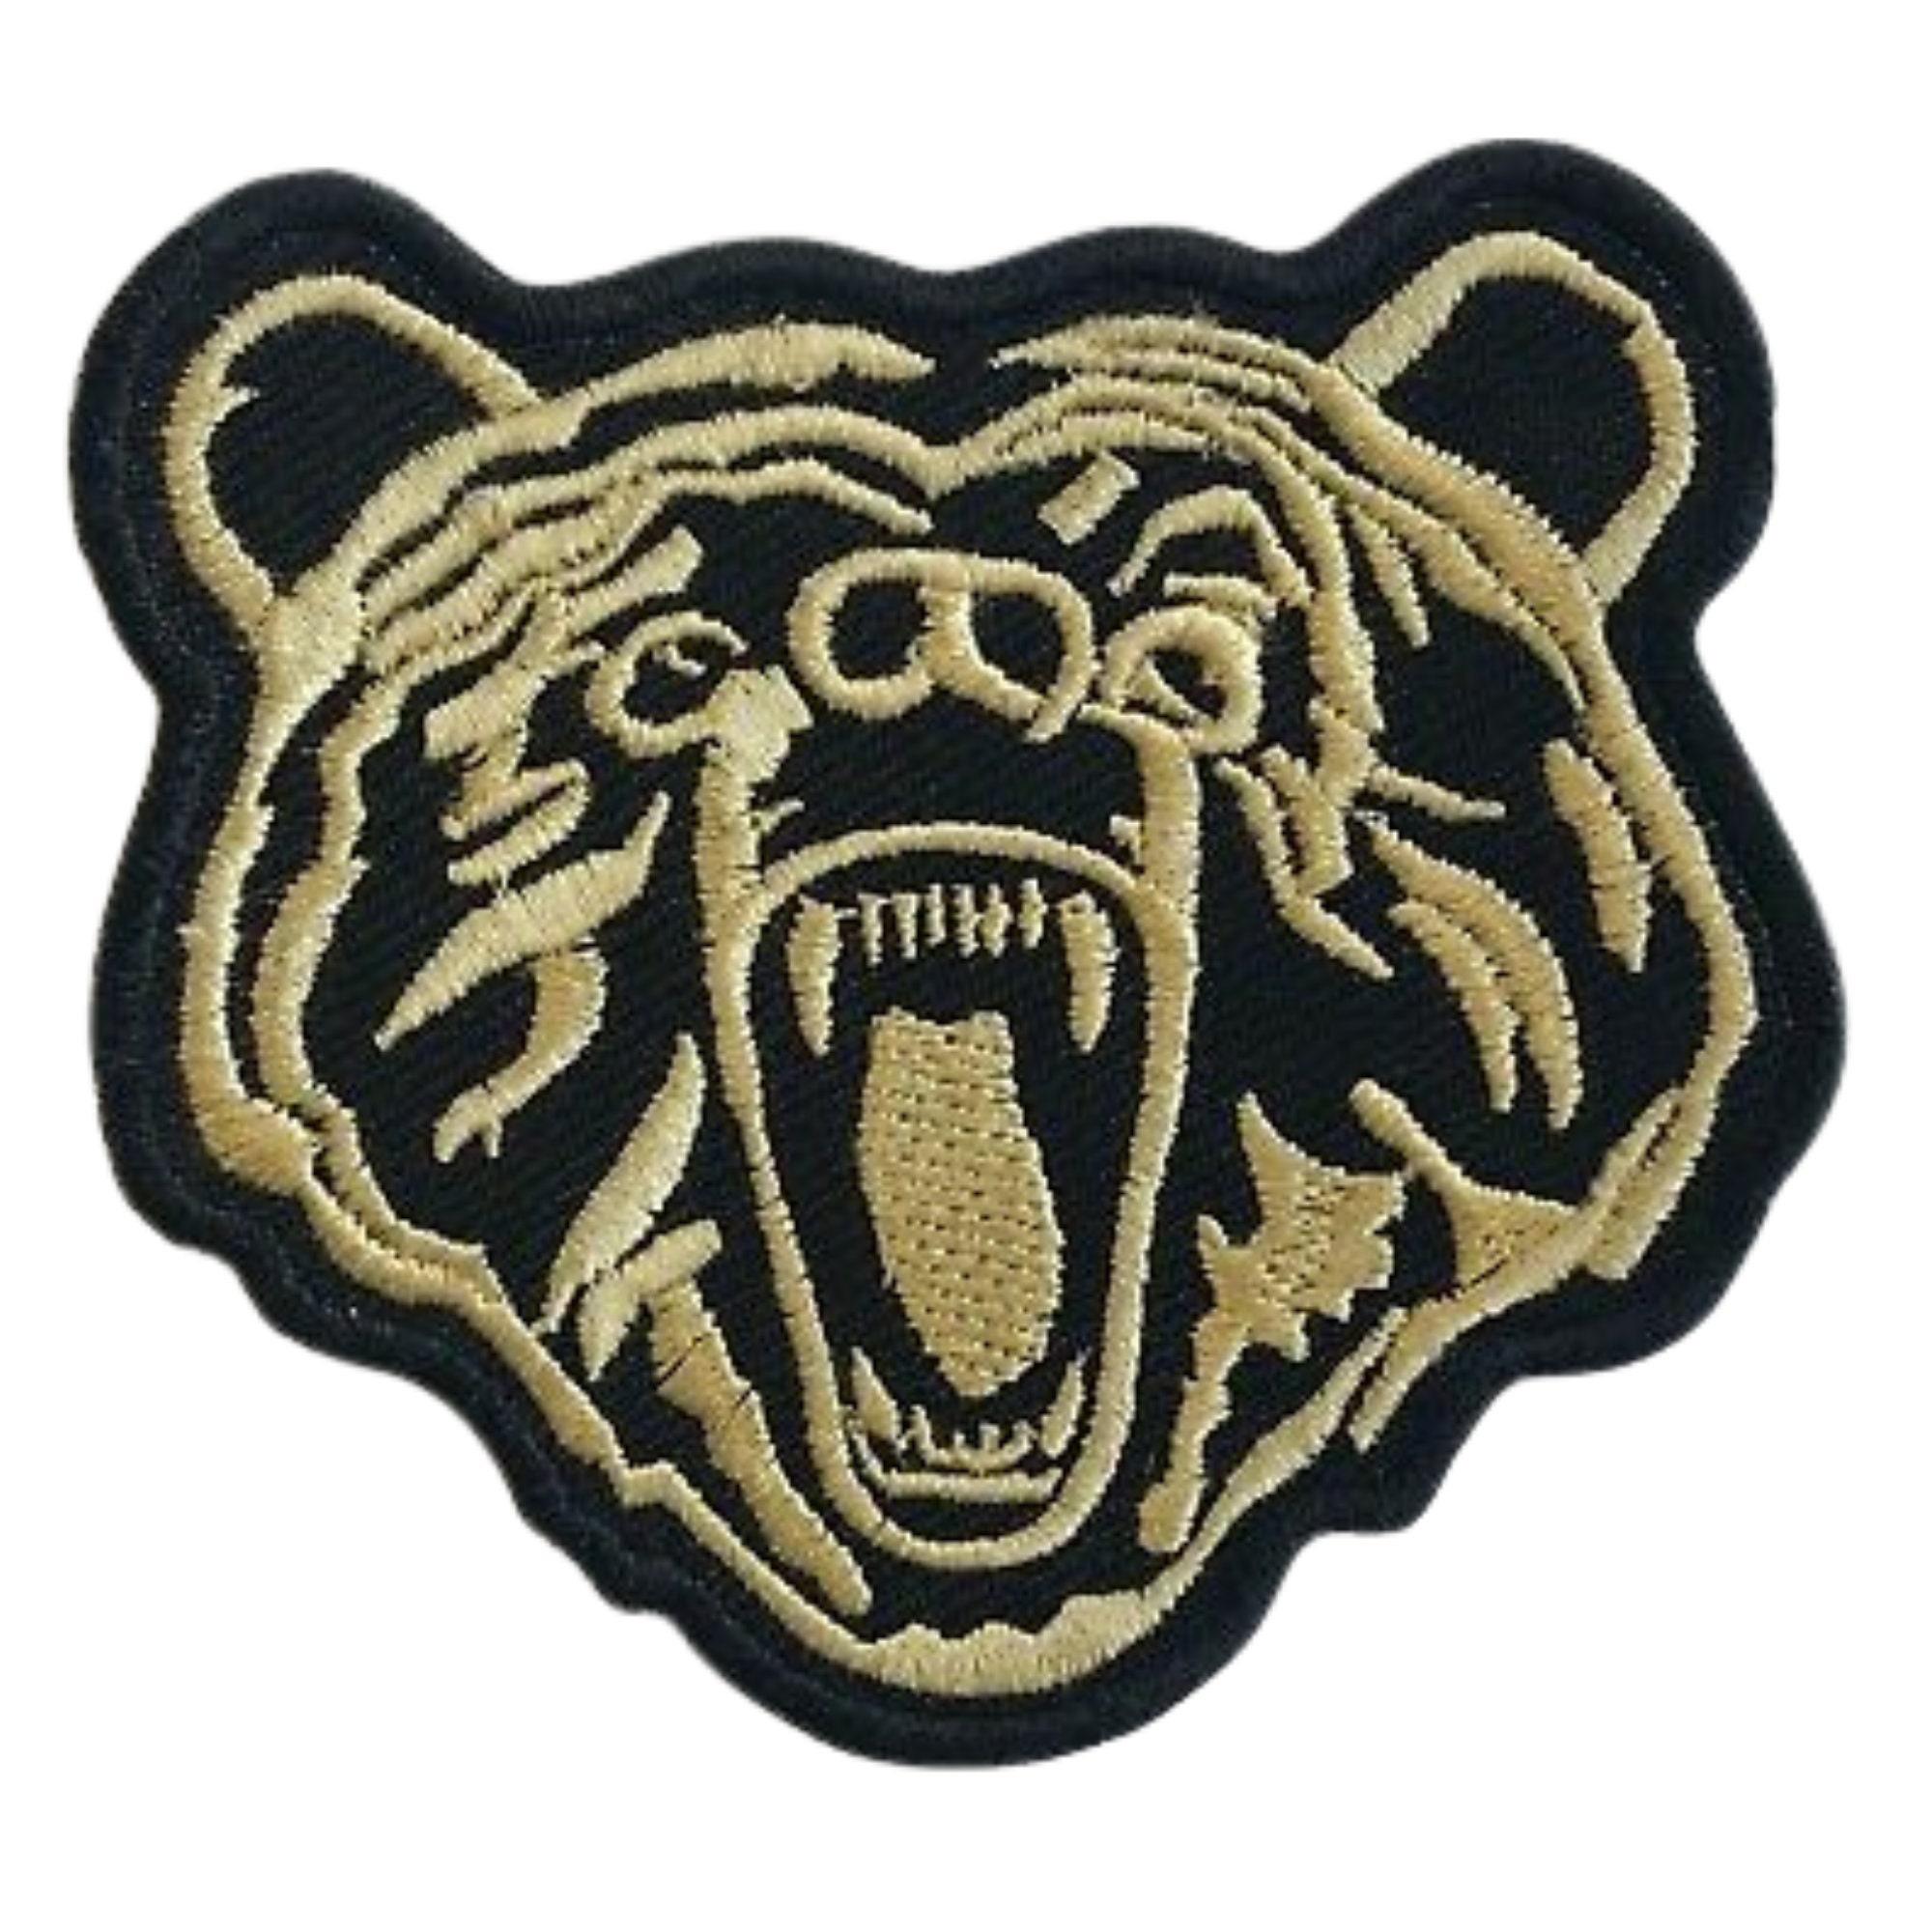 2010 Memphis Grizzlies 10th Anniversary Logo Jersey Patch – Patch